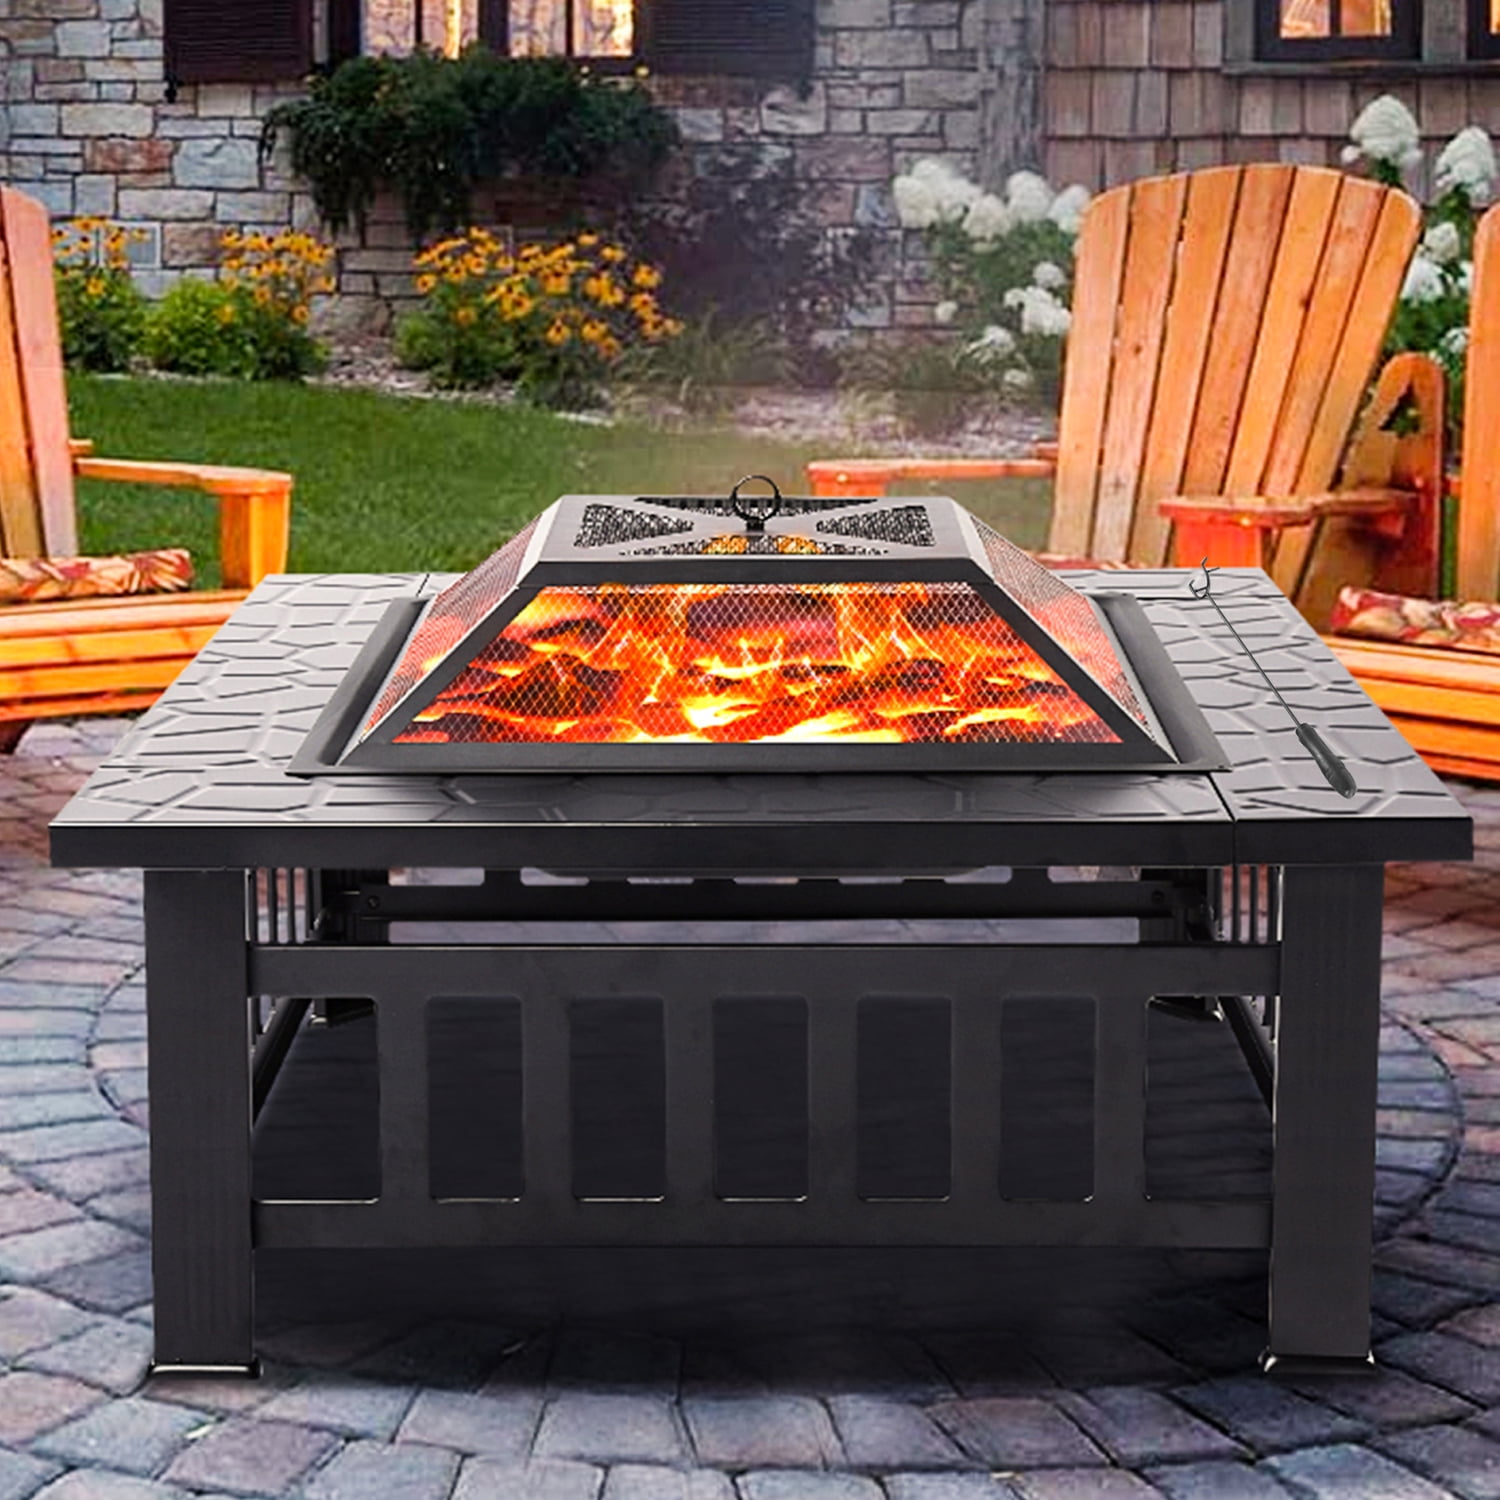 1Square GOOGNICE Fire Pit Outdoor Fire Pits Outdoor Wood Burning with Spark Screen Cover and Poker 